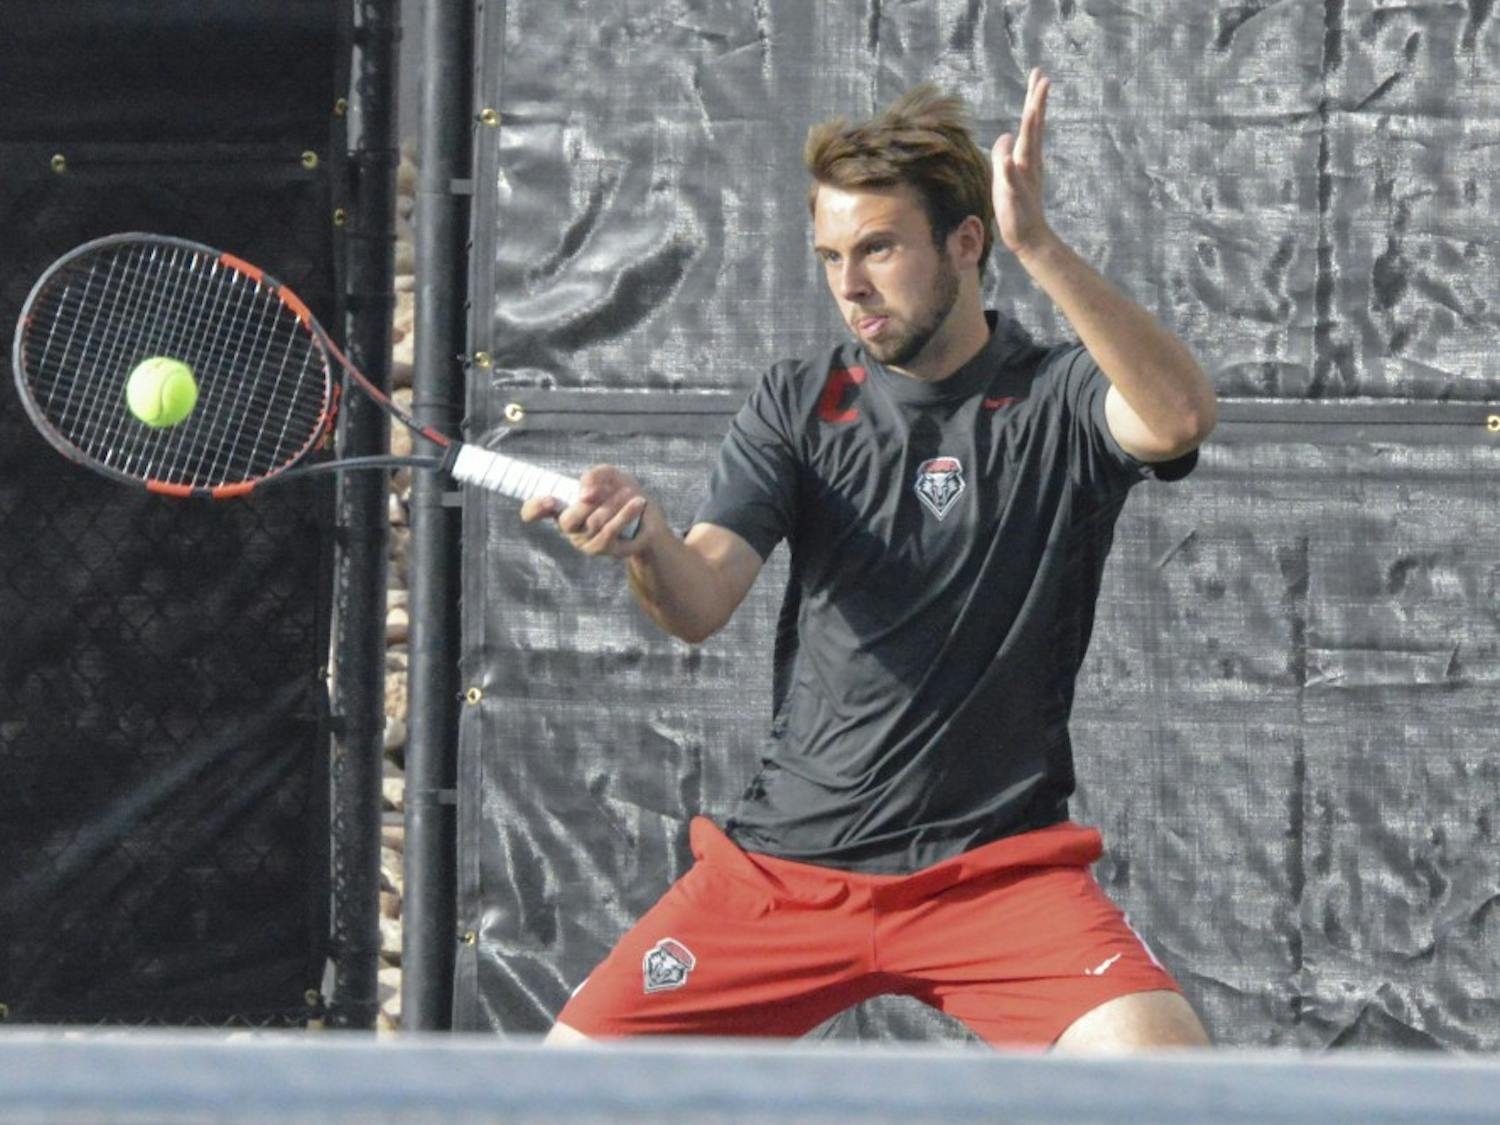 UNM senior James Hignett plays against Air Force Thursday night at the McKinnon Family Tennis Facility. The Lobos defended the Falcons 4-0. 
